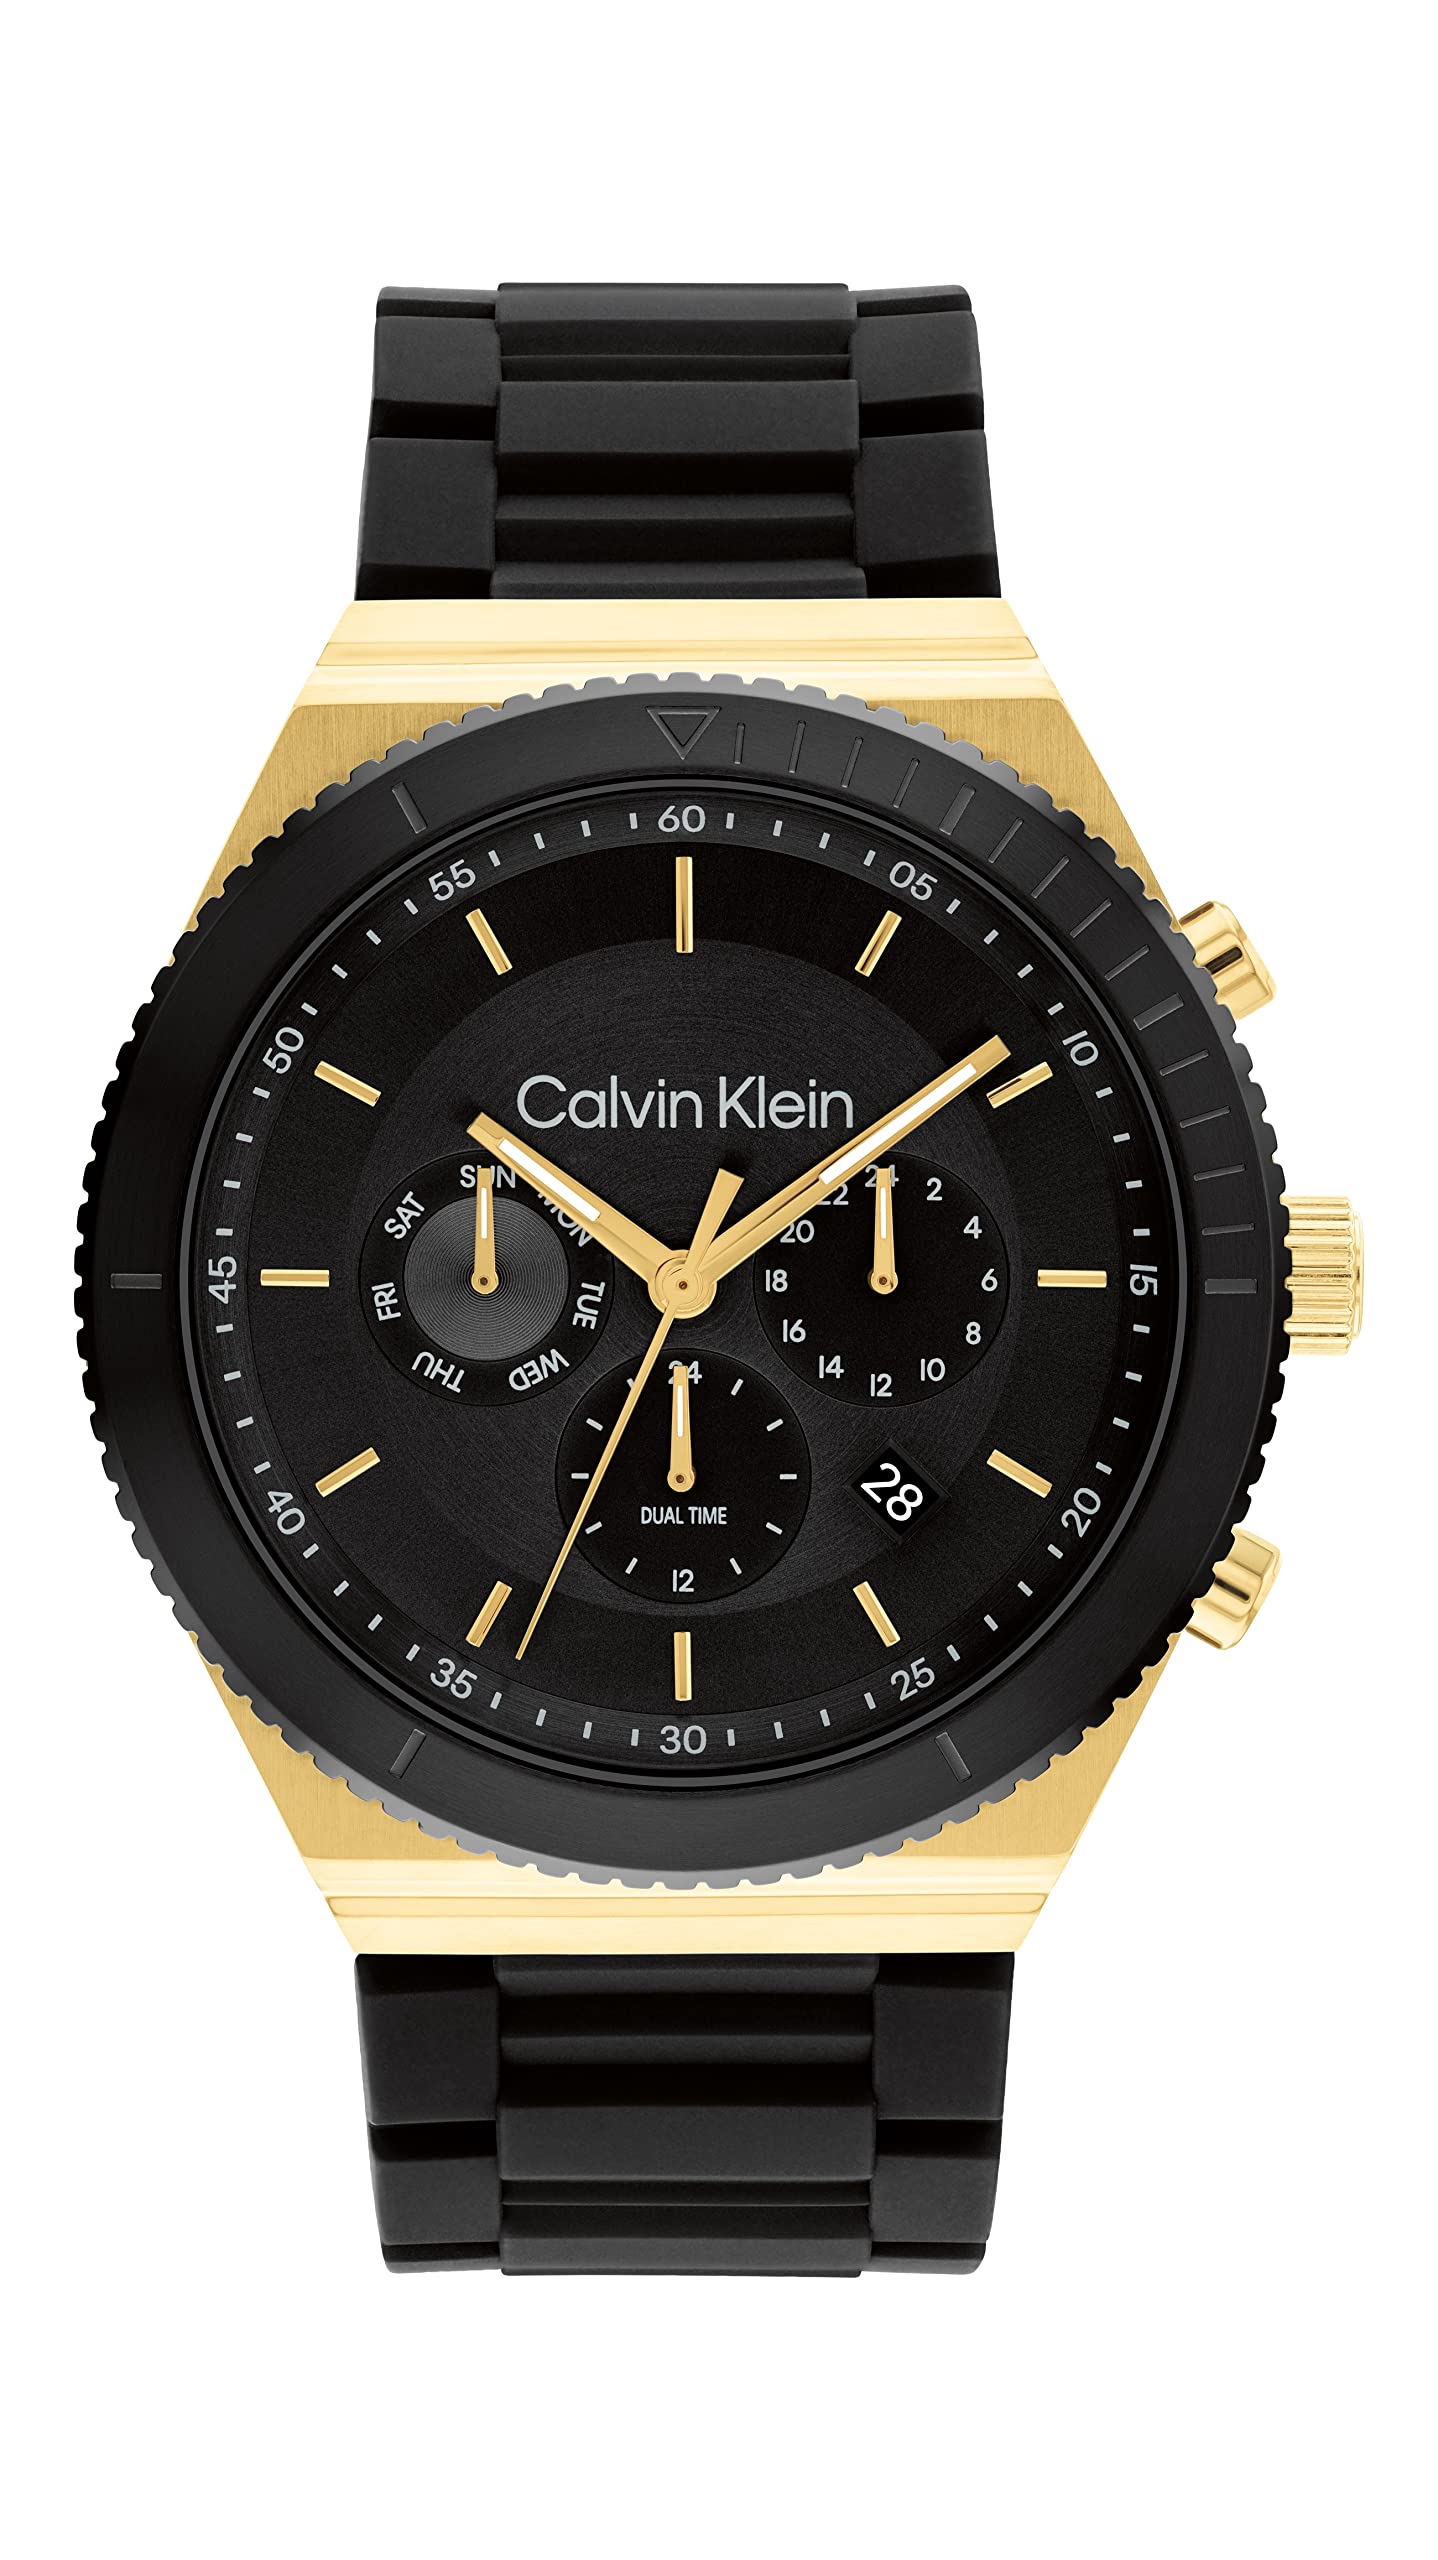 Calvin Klein Men's Quartz 25200306 Ionic Plated Thin Gold Steel and Silicone Strap Watch, Color: Black